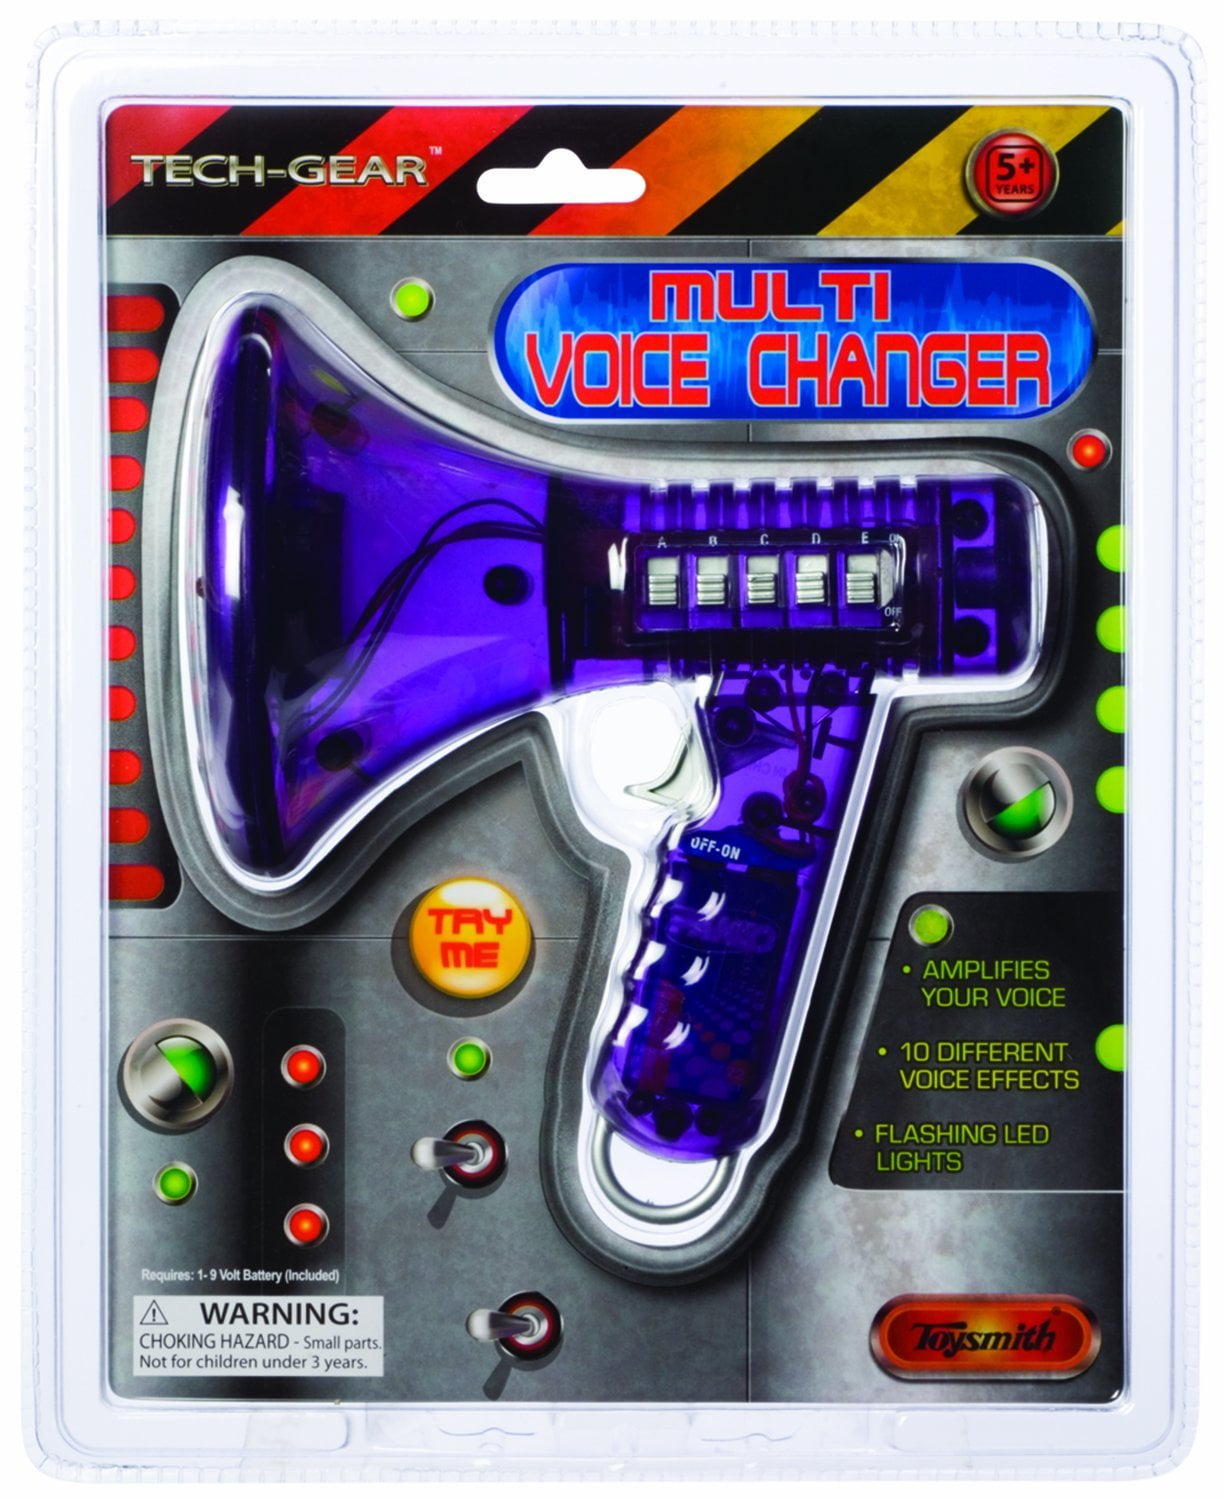 toy the voice